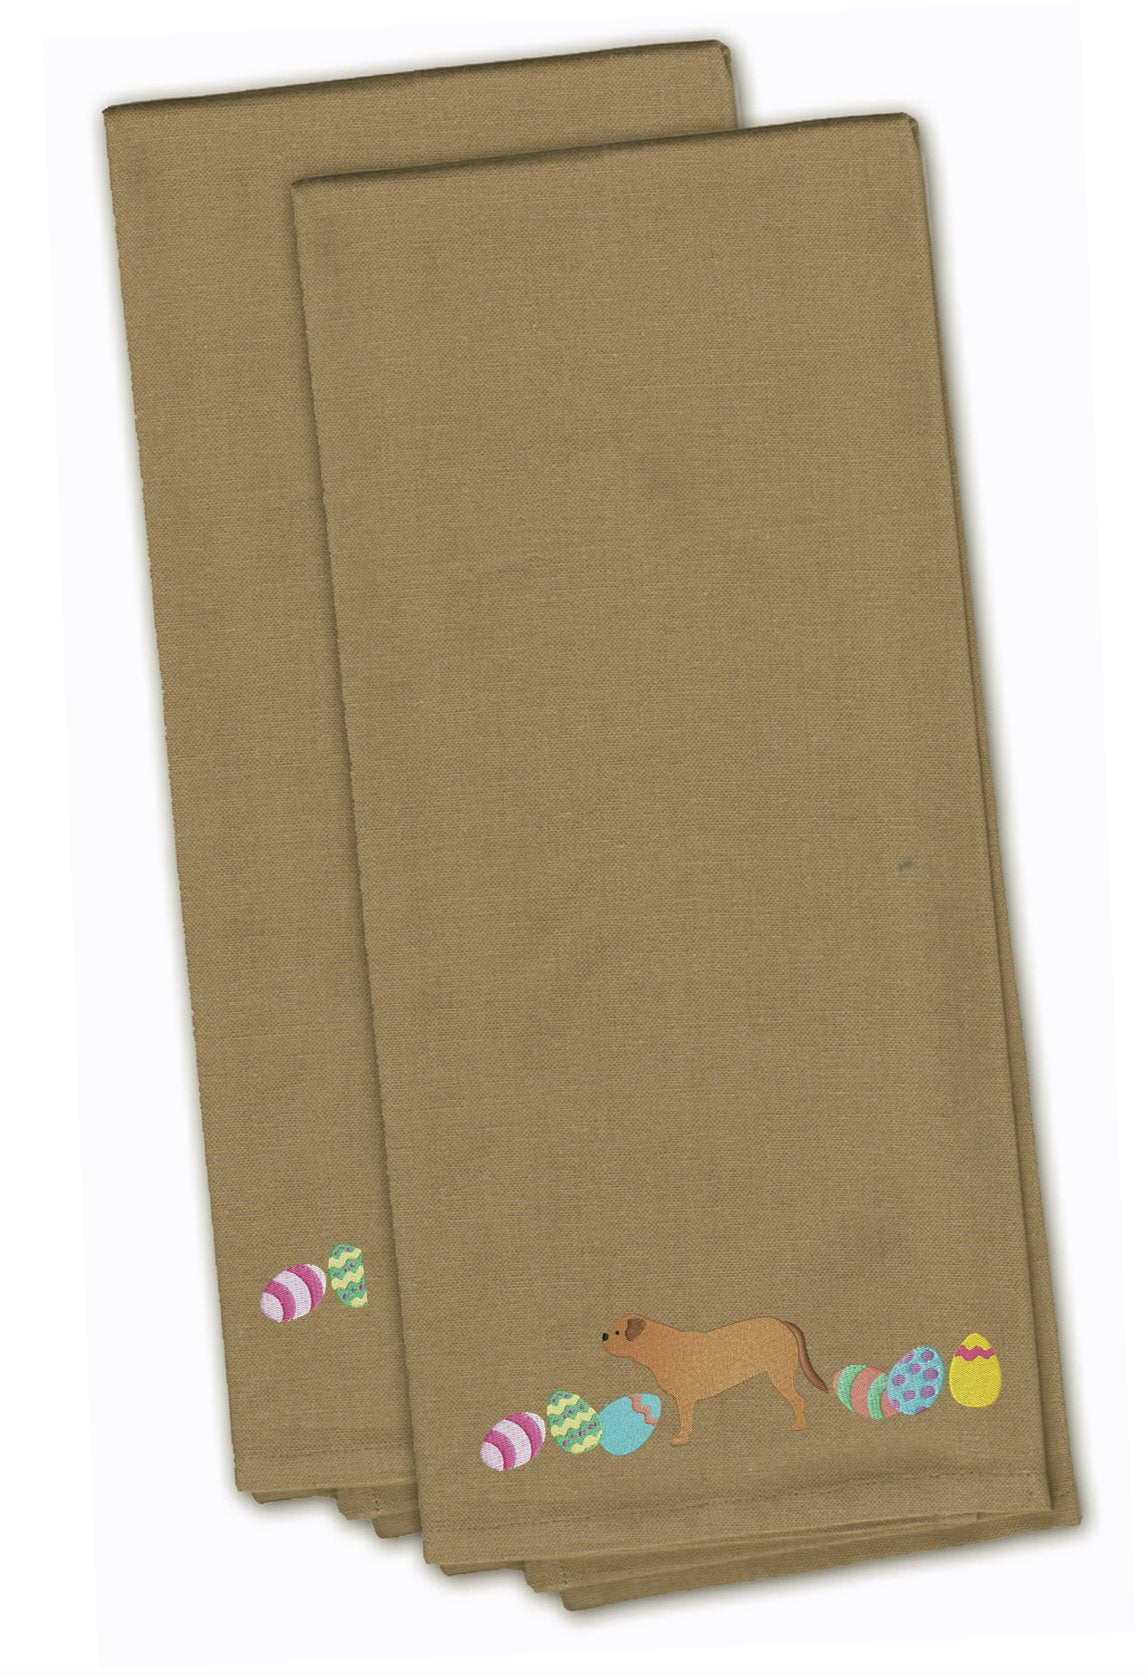 Dogue de Bordeaux Easter Tan Embroidered Kitchen Towel Set of 2 CK1635TNTWE by Caroline's Treasures